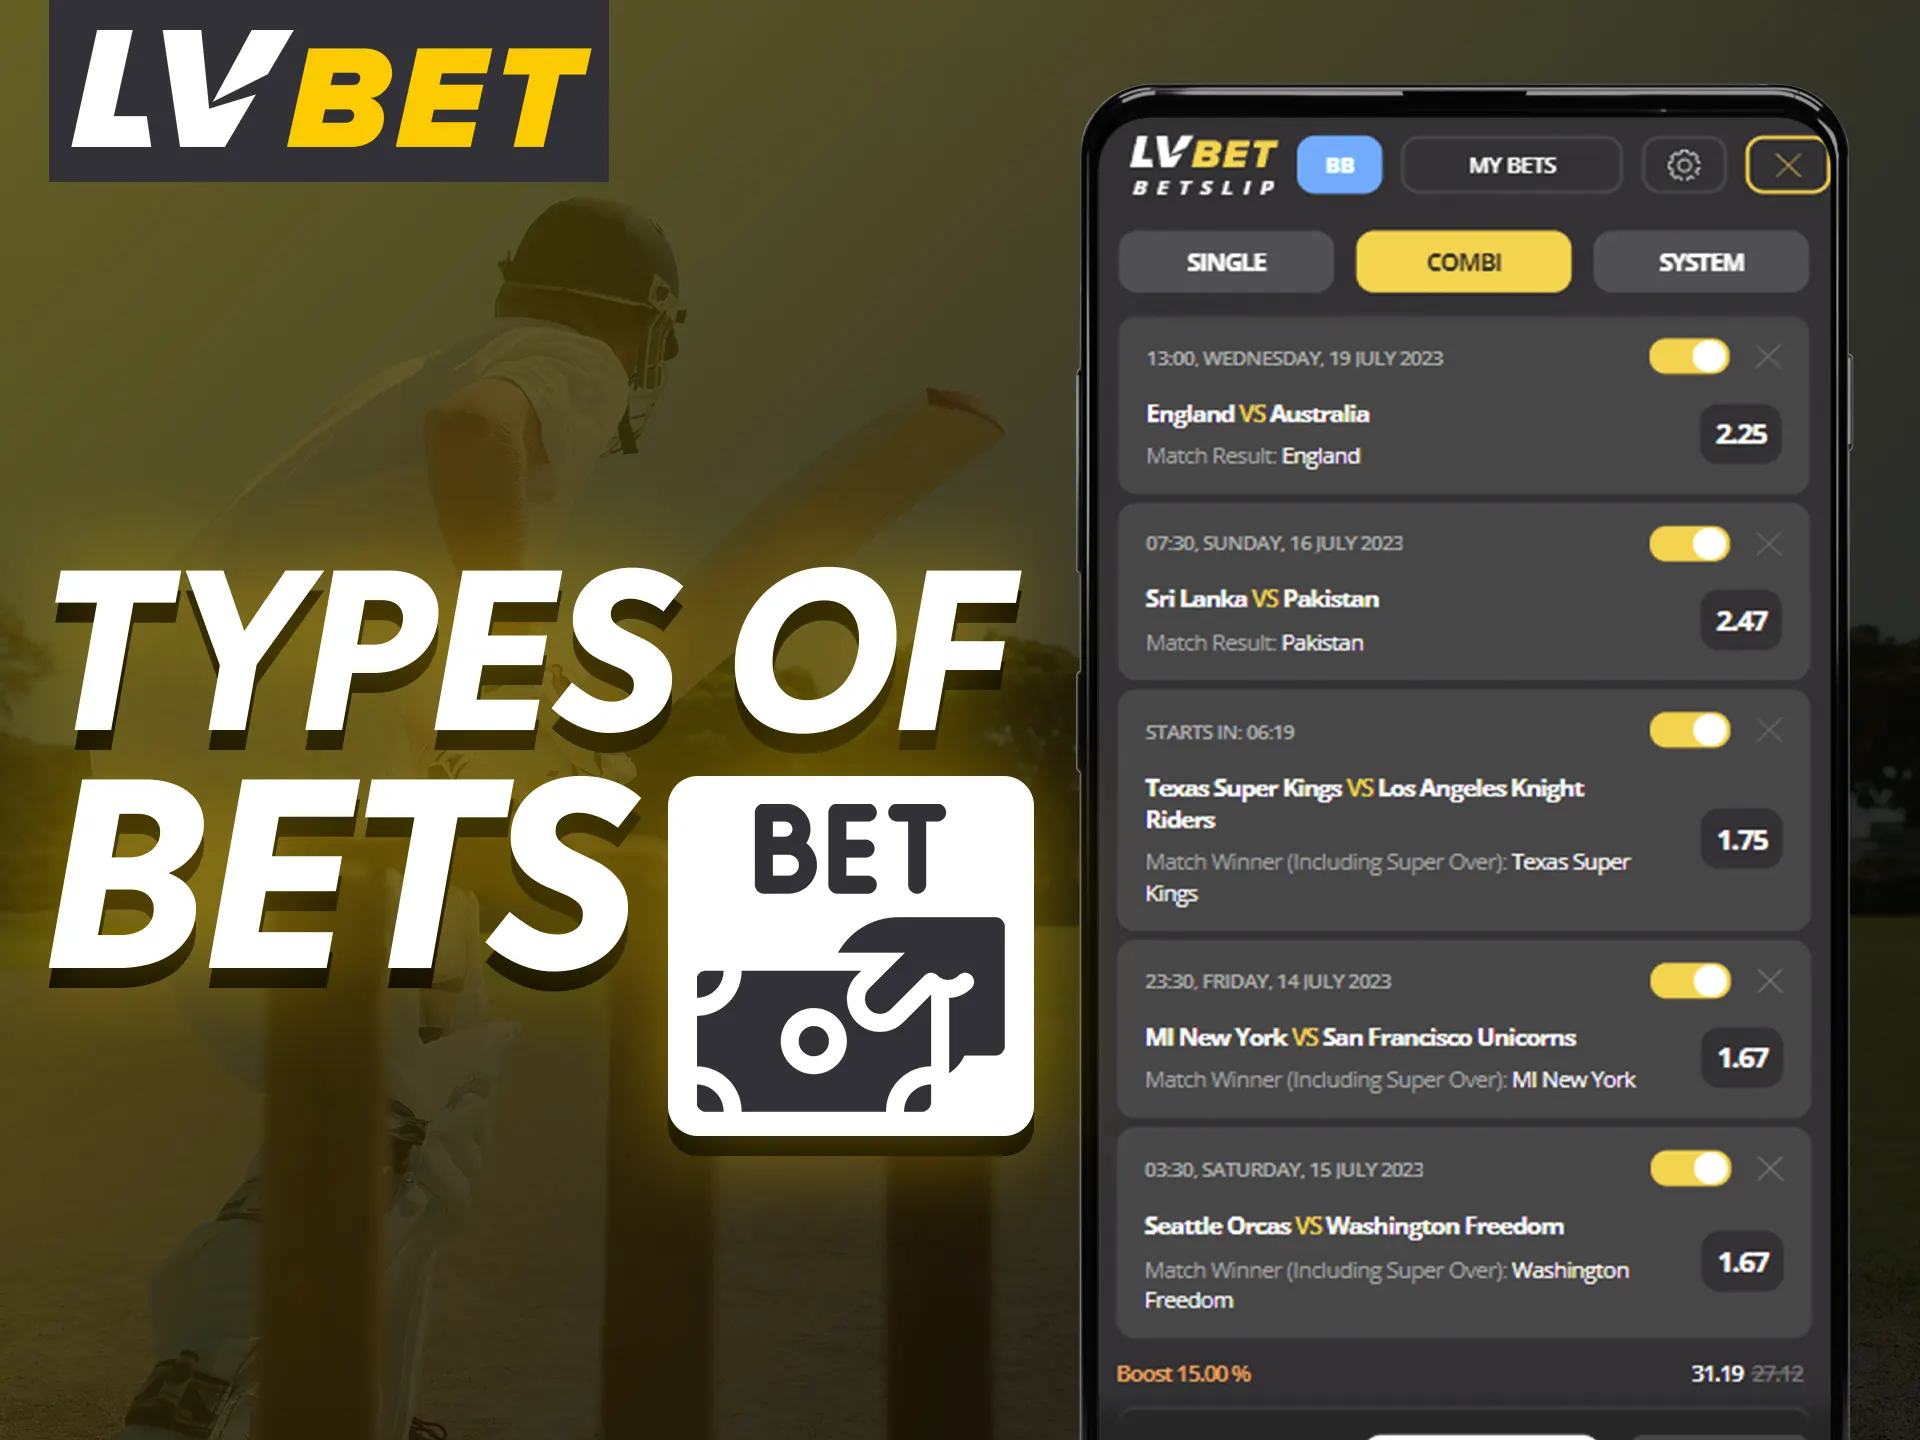 Different types of bets are available to you in the LV Bet app.